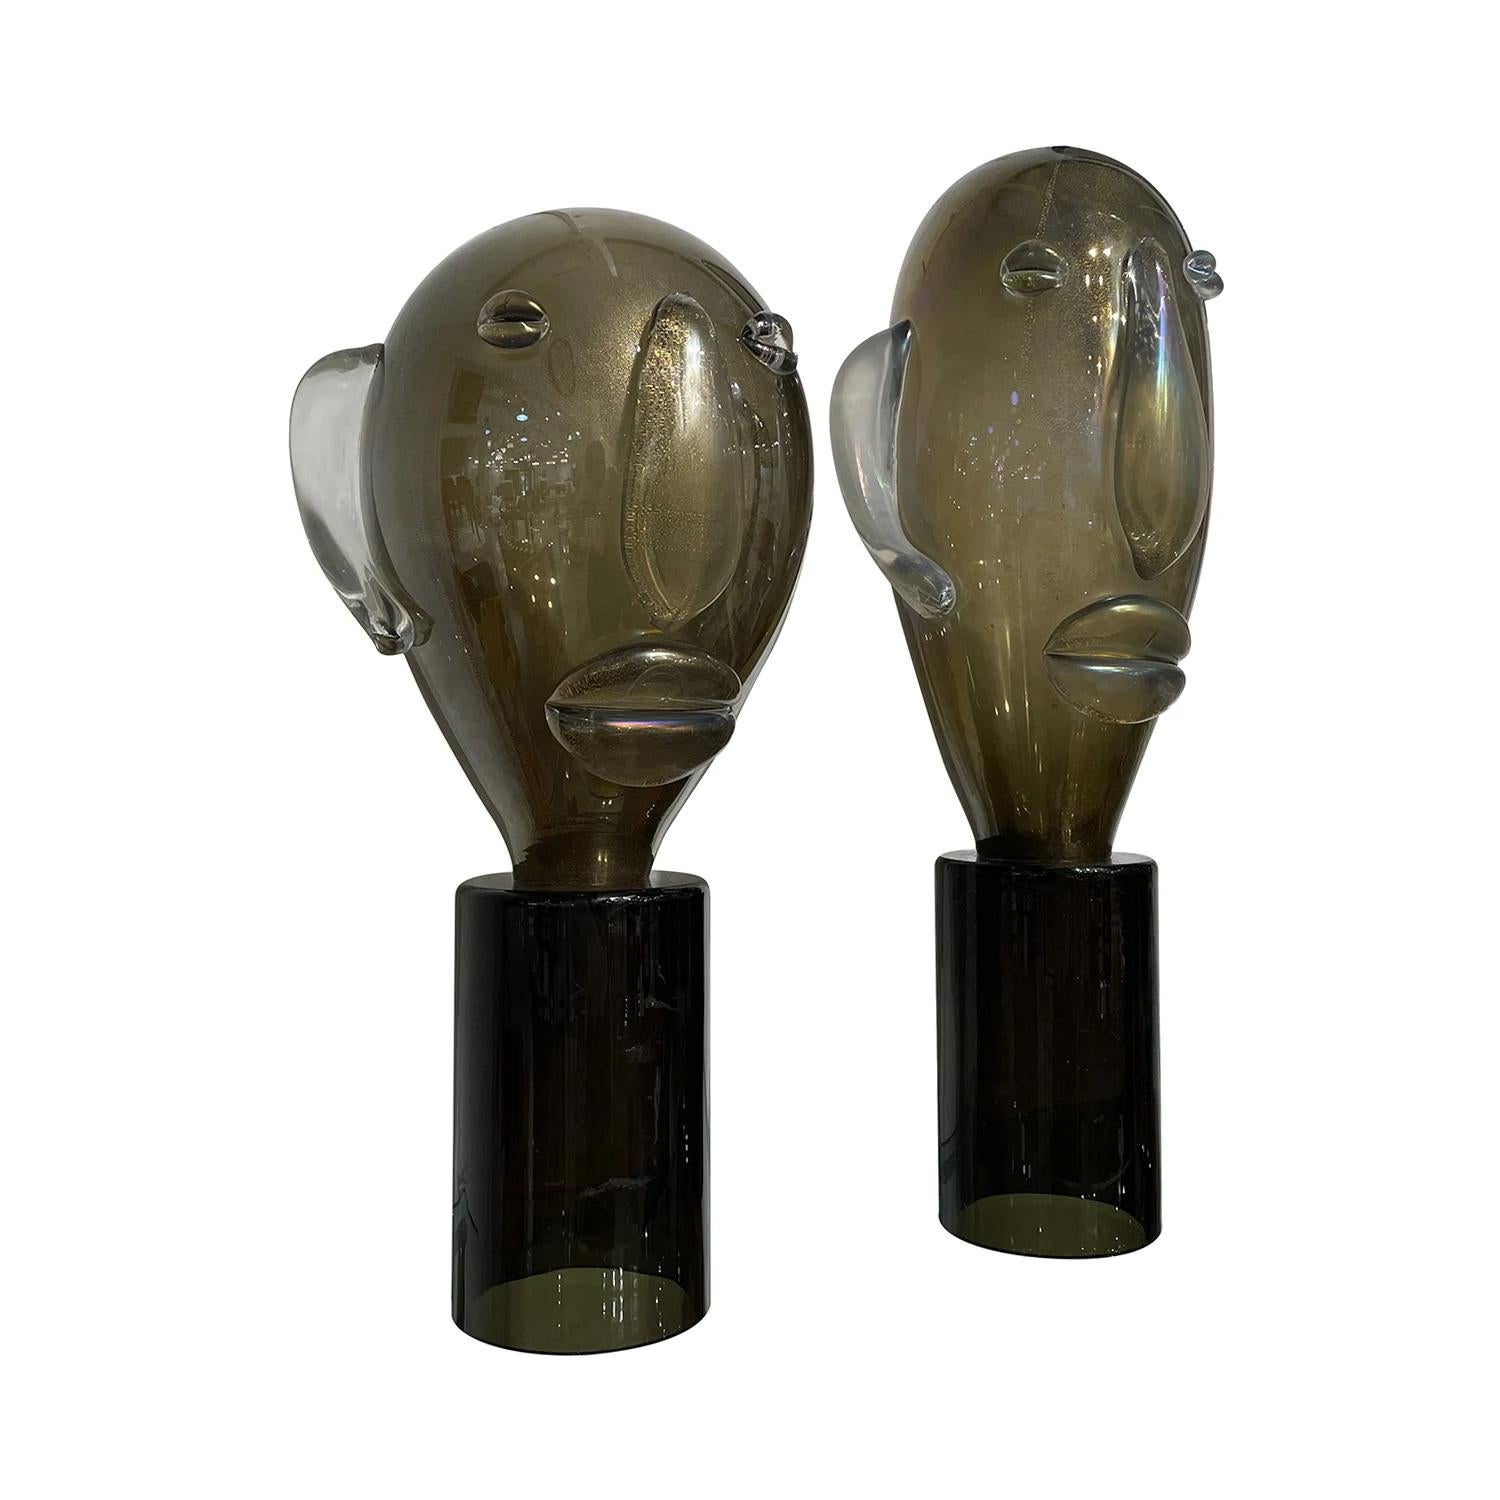 A late vintage Mid-Century Modern Italian similar pair of sculpture heads made of hand blown smoked Murano glass in the style of Picasso, in good condition. The detailed décor pieces are particularized with gold spots, resting on a round black base.